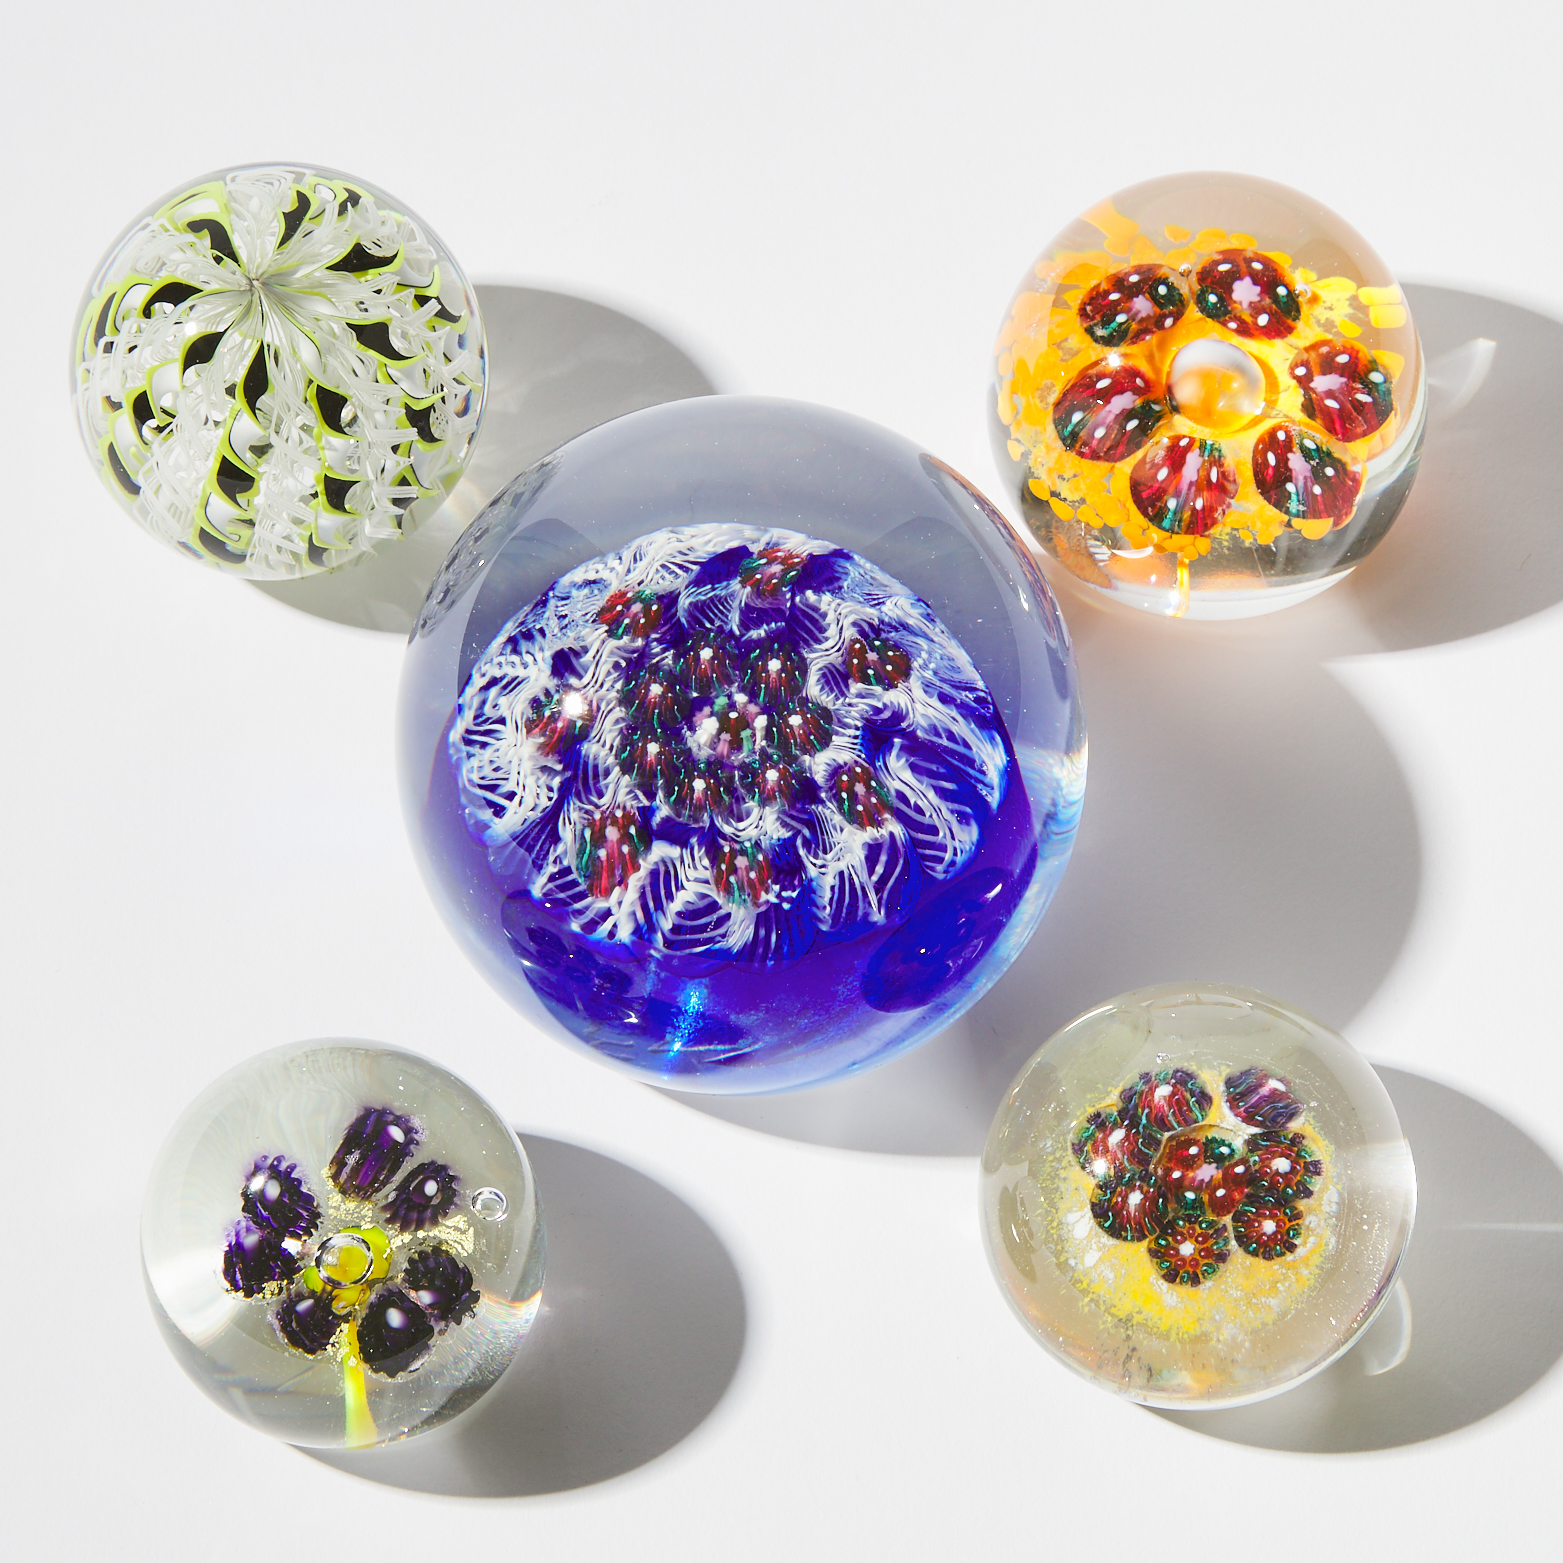 Virginia Wilson Toccalino (Canadian), Five Glass Paperweights, c.1997